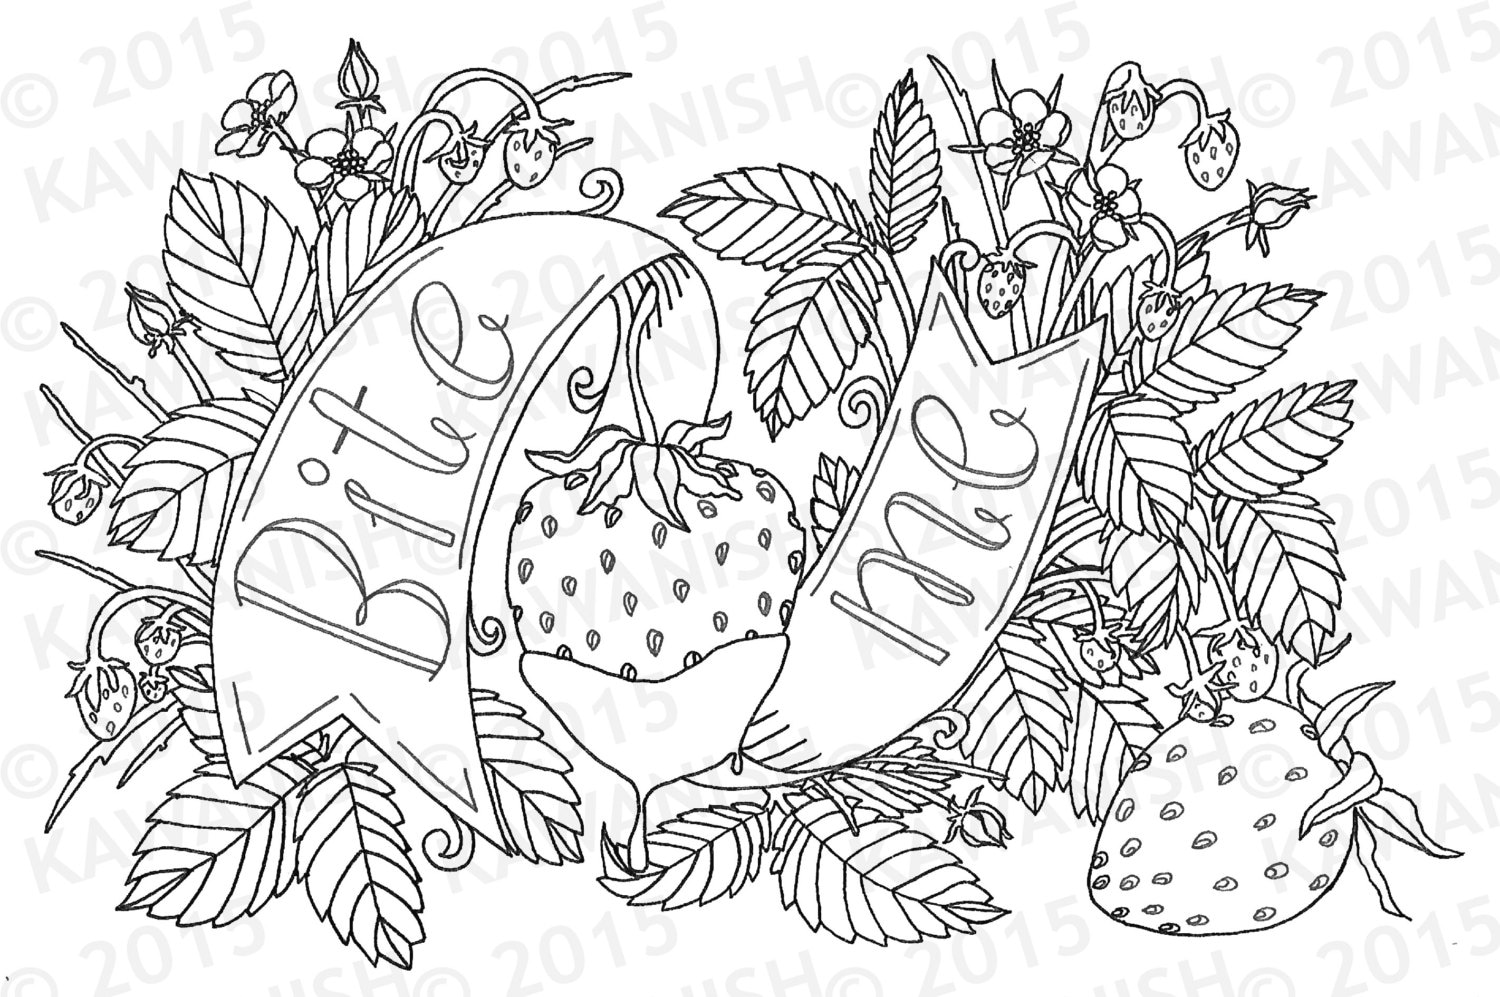 bite me strawberry adult coloring page wall art t funny humor